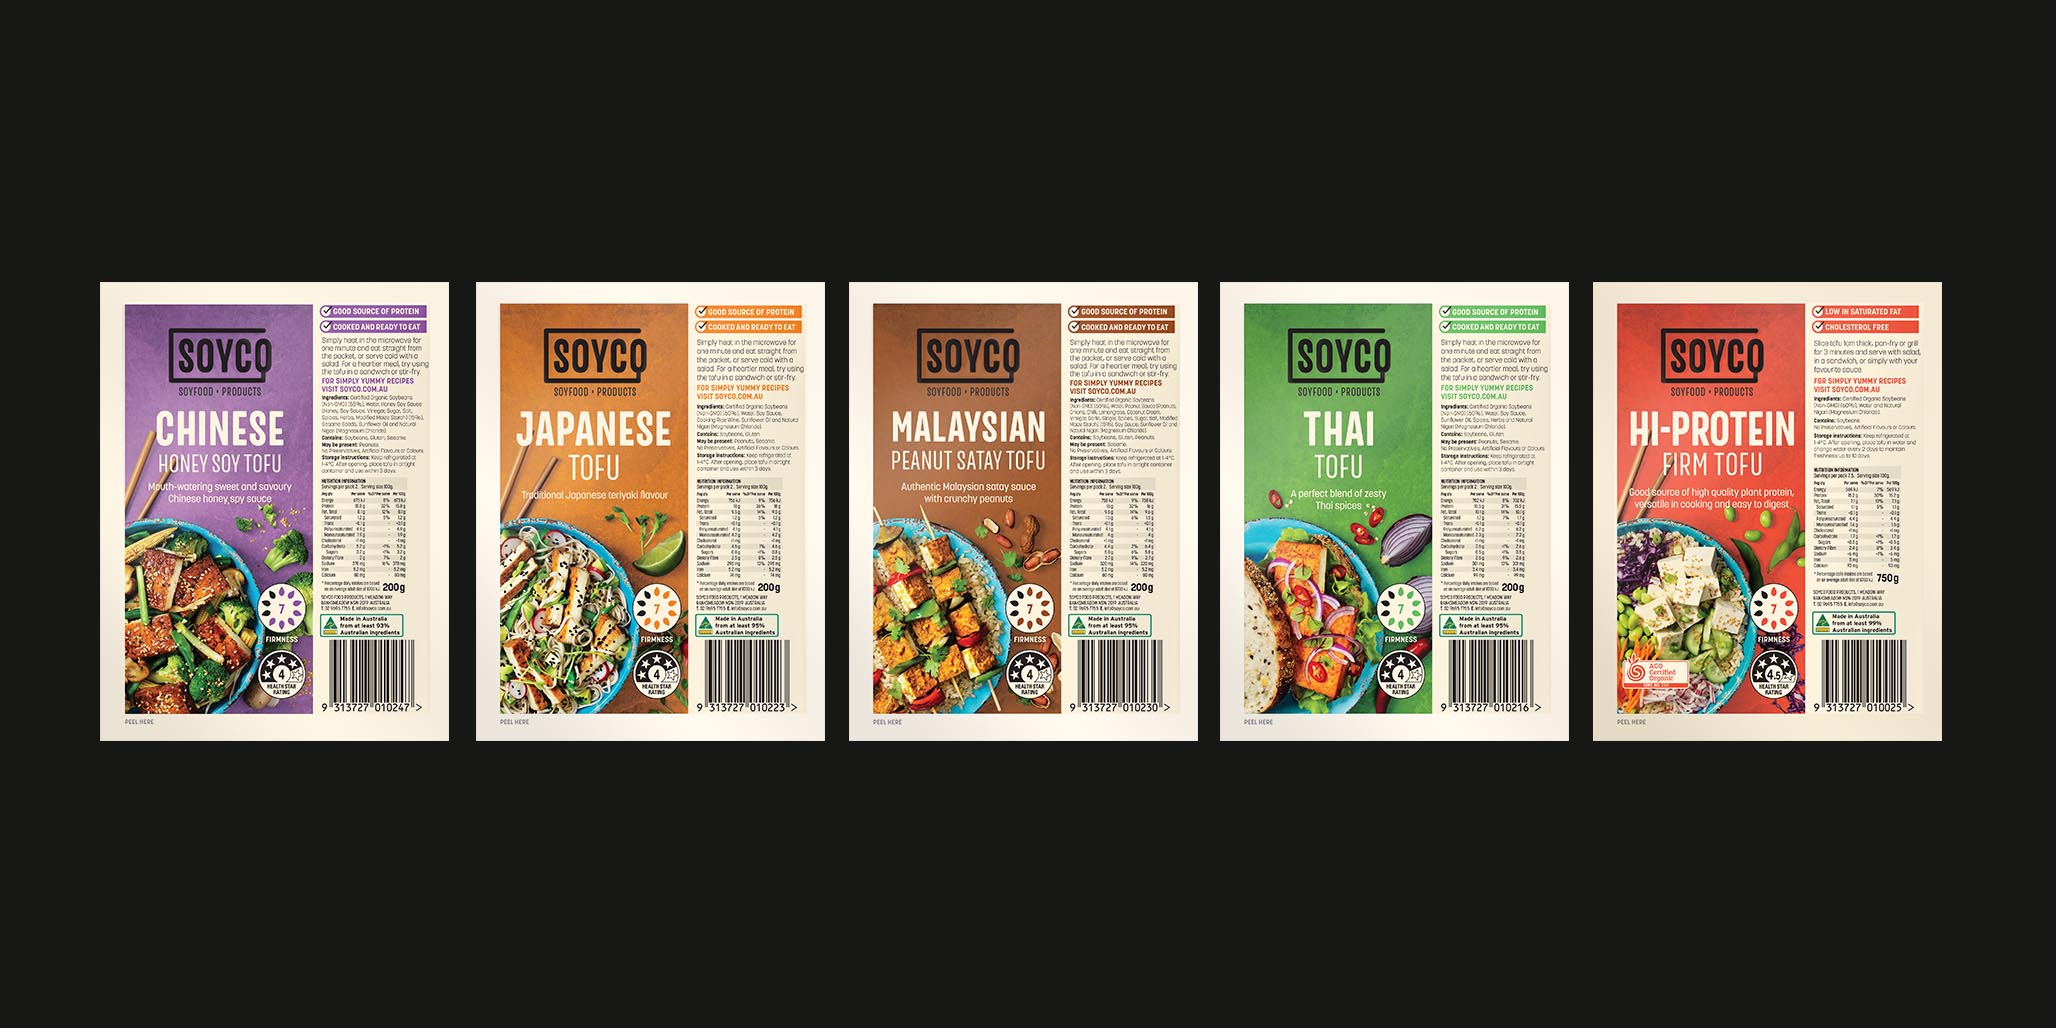 Brand Identity & Packaging Design project for FMCG food products by Branding Agency, Percept, image F